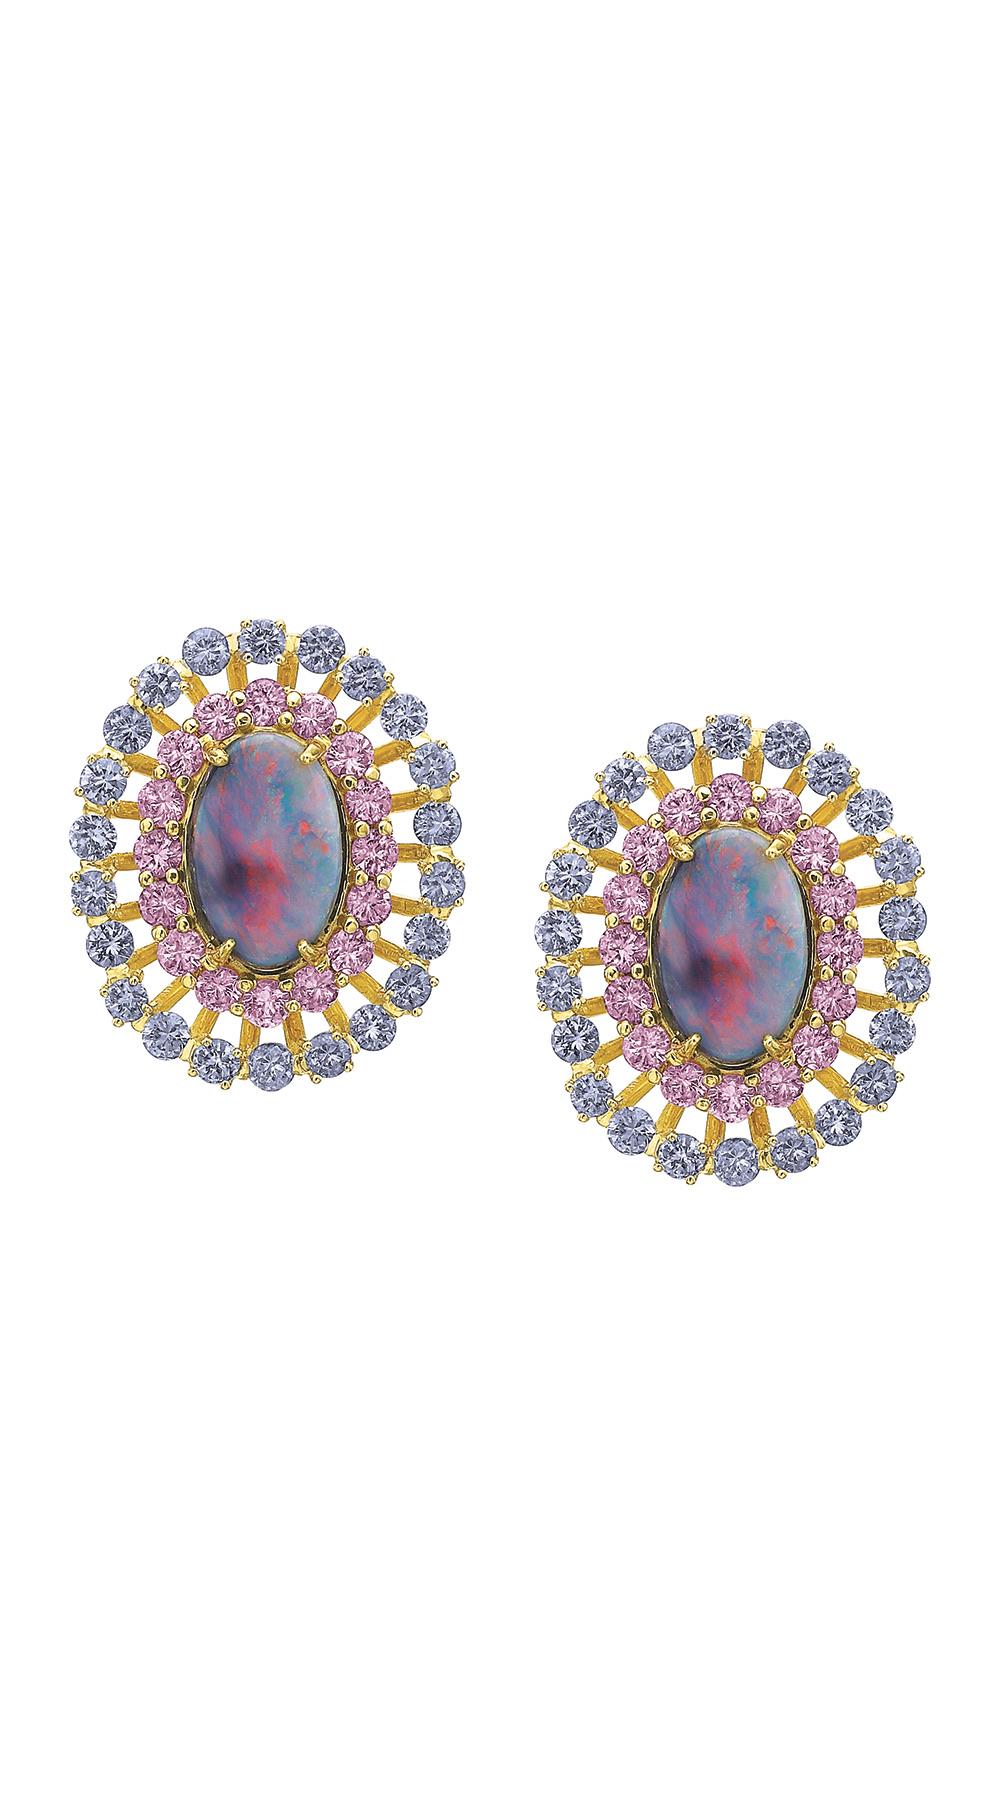 These Spectacular Australian Lightning Ridge Day to Night Earrings are a stunning combination of colors to light up the face (and the room)! 5.1 carats of Lightning Ridge Oval Black Opals and 21.05 carats of Blue Jelly Opals from the same region.